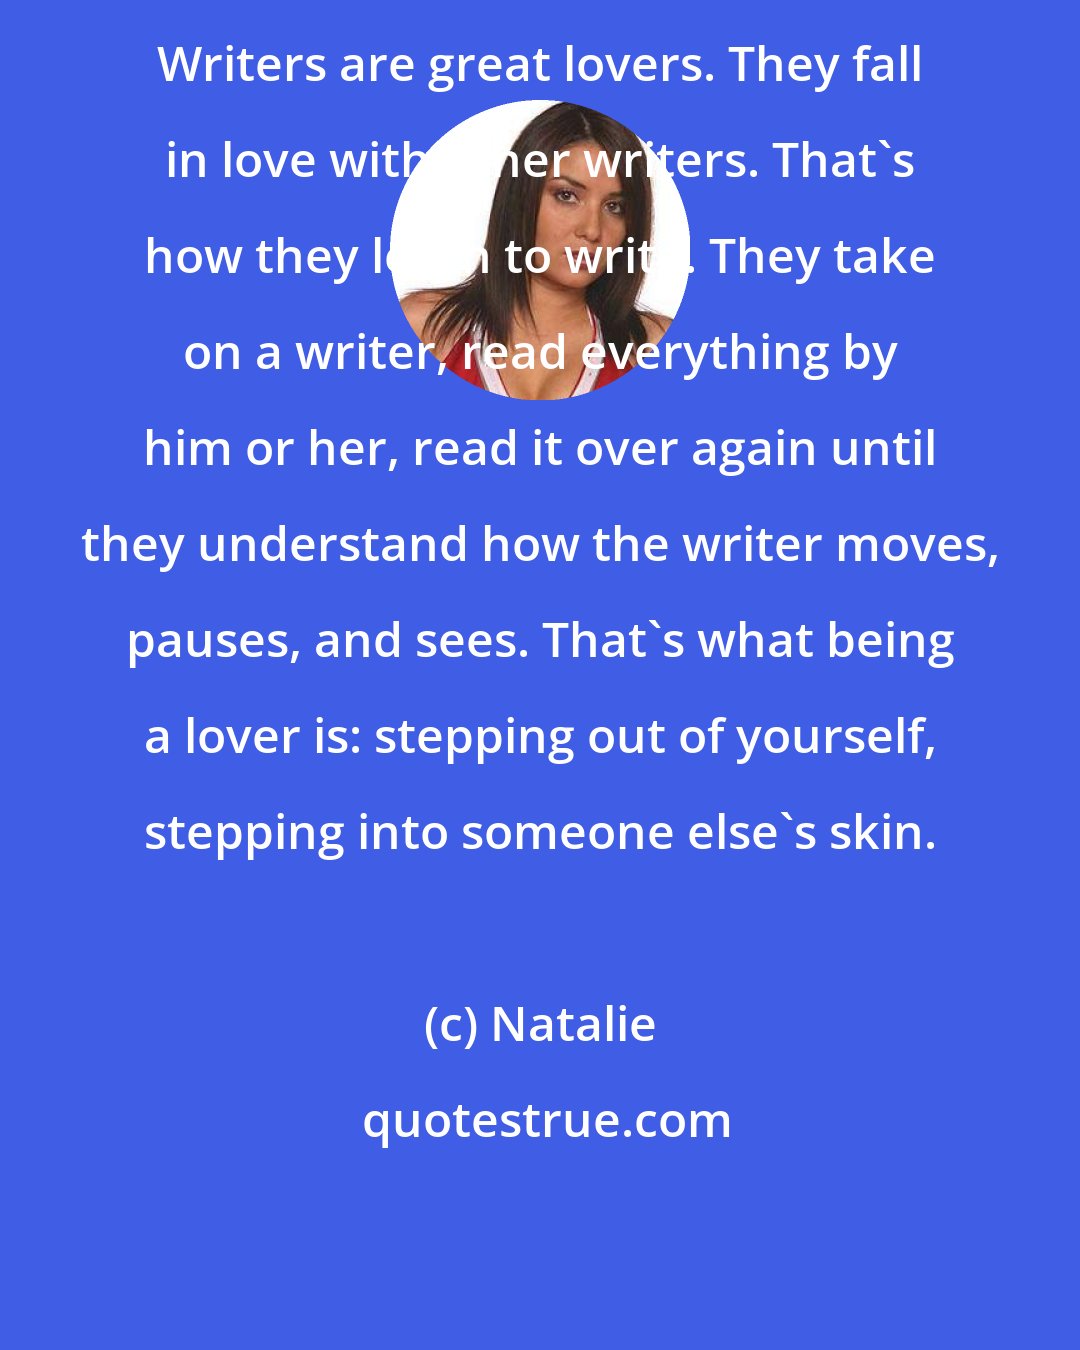 Natalie: Writers are great lovers. They fall in love with other writers. That's how they learn to write. They take on a writer, read everything by him or her, read it over again until they understand how the writer moves, pauses, and sees. That's what being a lover is: stepping out of yourself, stepping into someone else's skin.